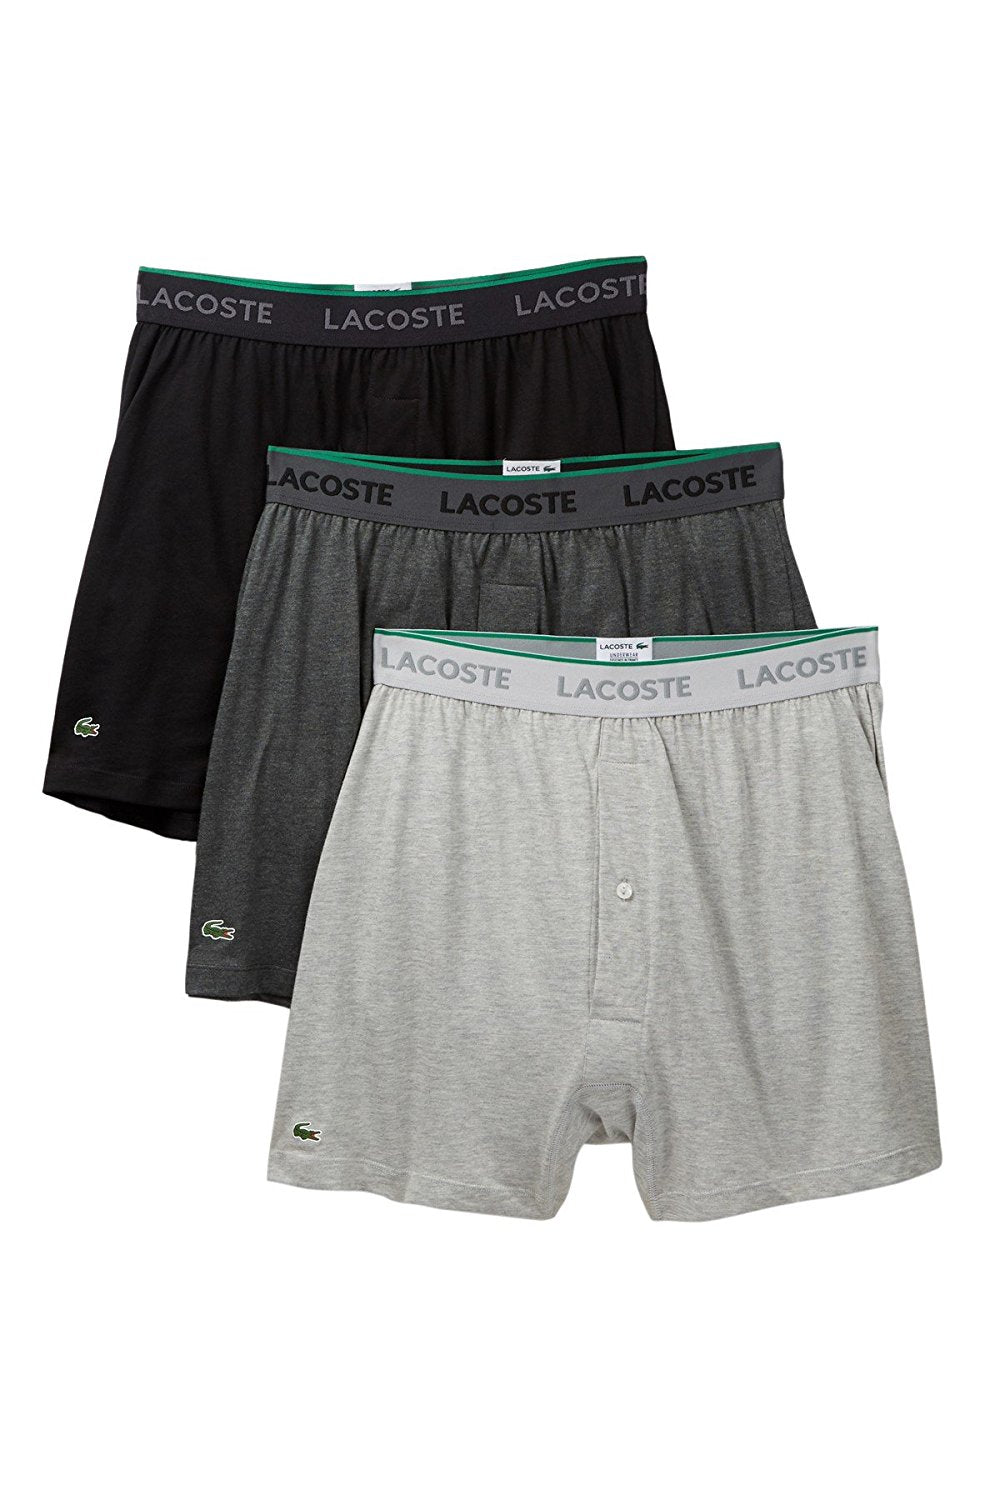 Lacoste Pack Supima Knit Boxer I-Max Fashions